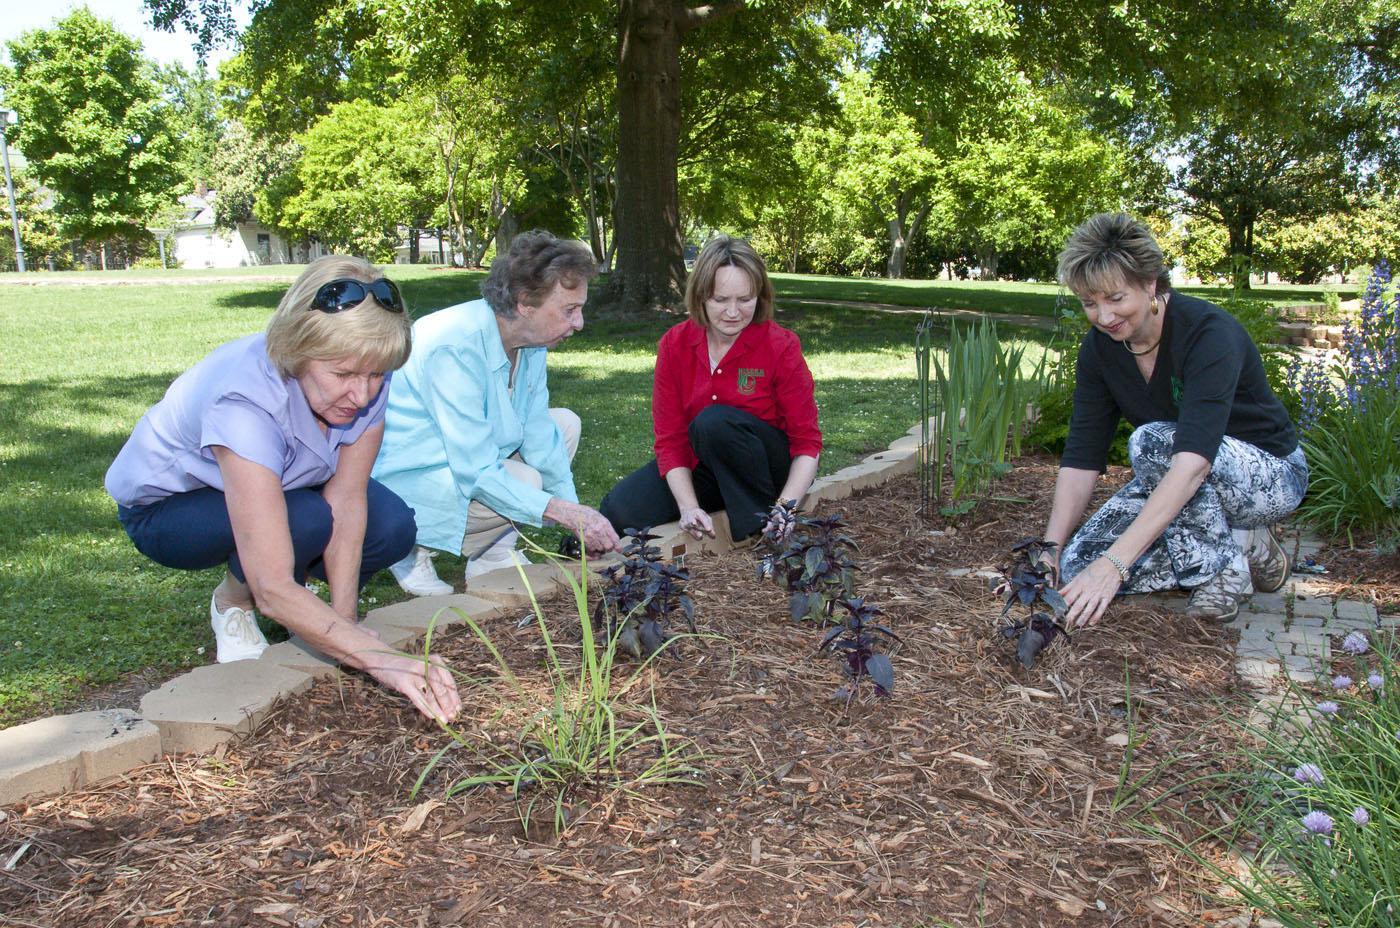 Lowndes County Master Gardeners, from left, Jean Wilson, Mary Faglie, Jennifer Duzan and Nell Thomas examine some of the herbs growing in the garden they renovated for the Culinary Institute at Mississippi University for Women. (Photo by Scott Corey)